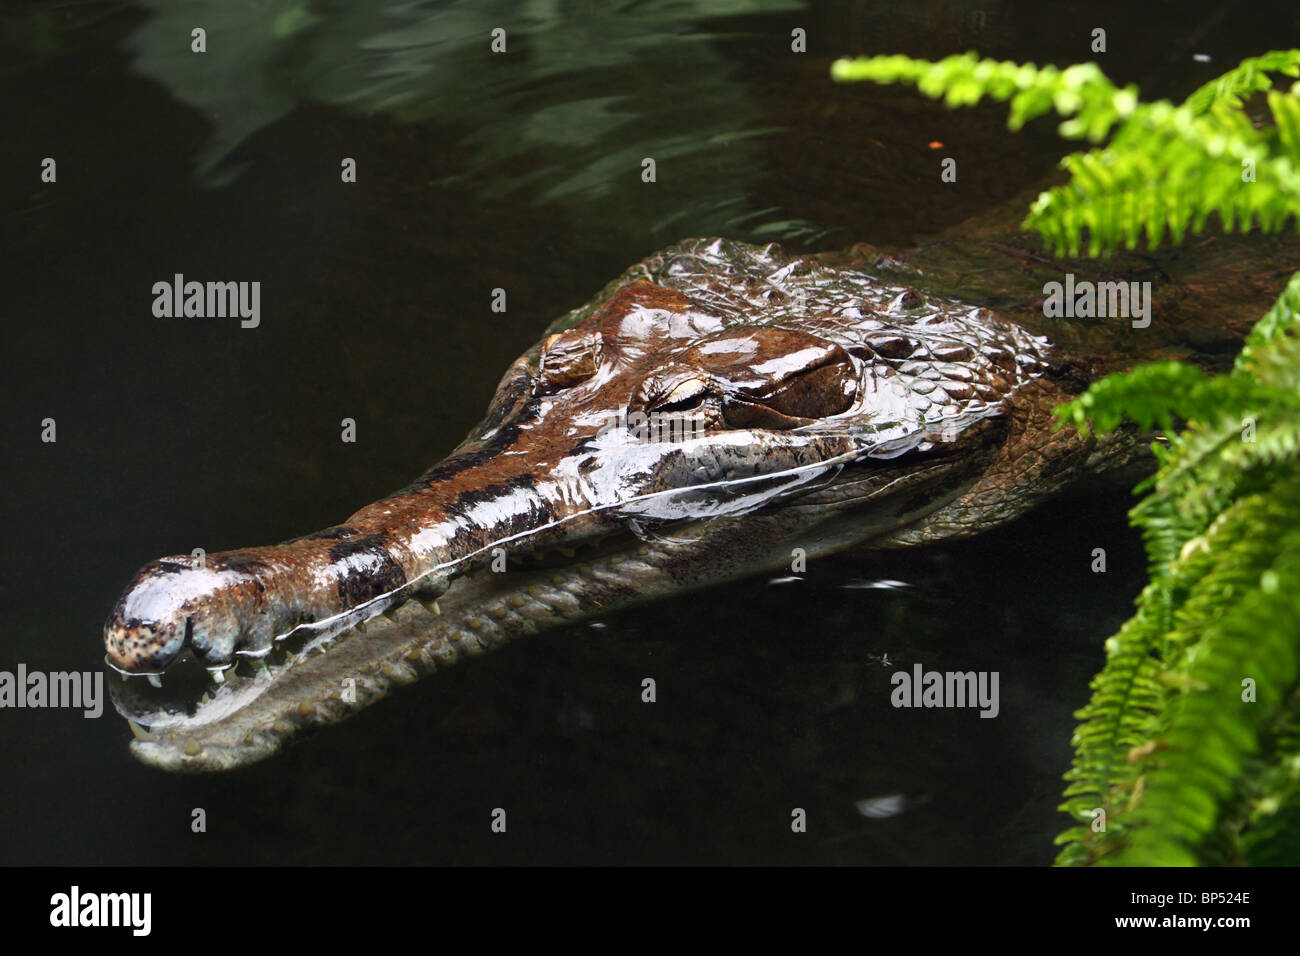 Crocodile in water with fern Stock Photo